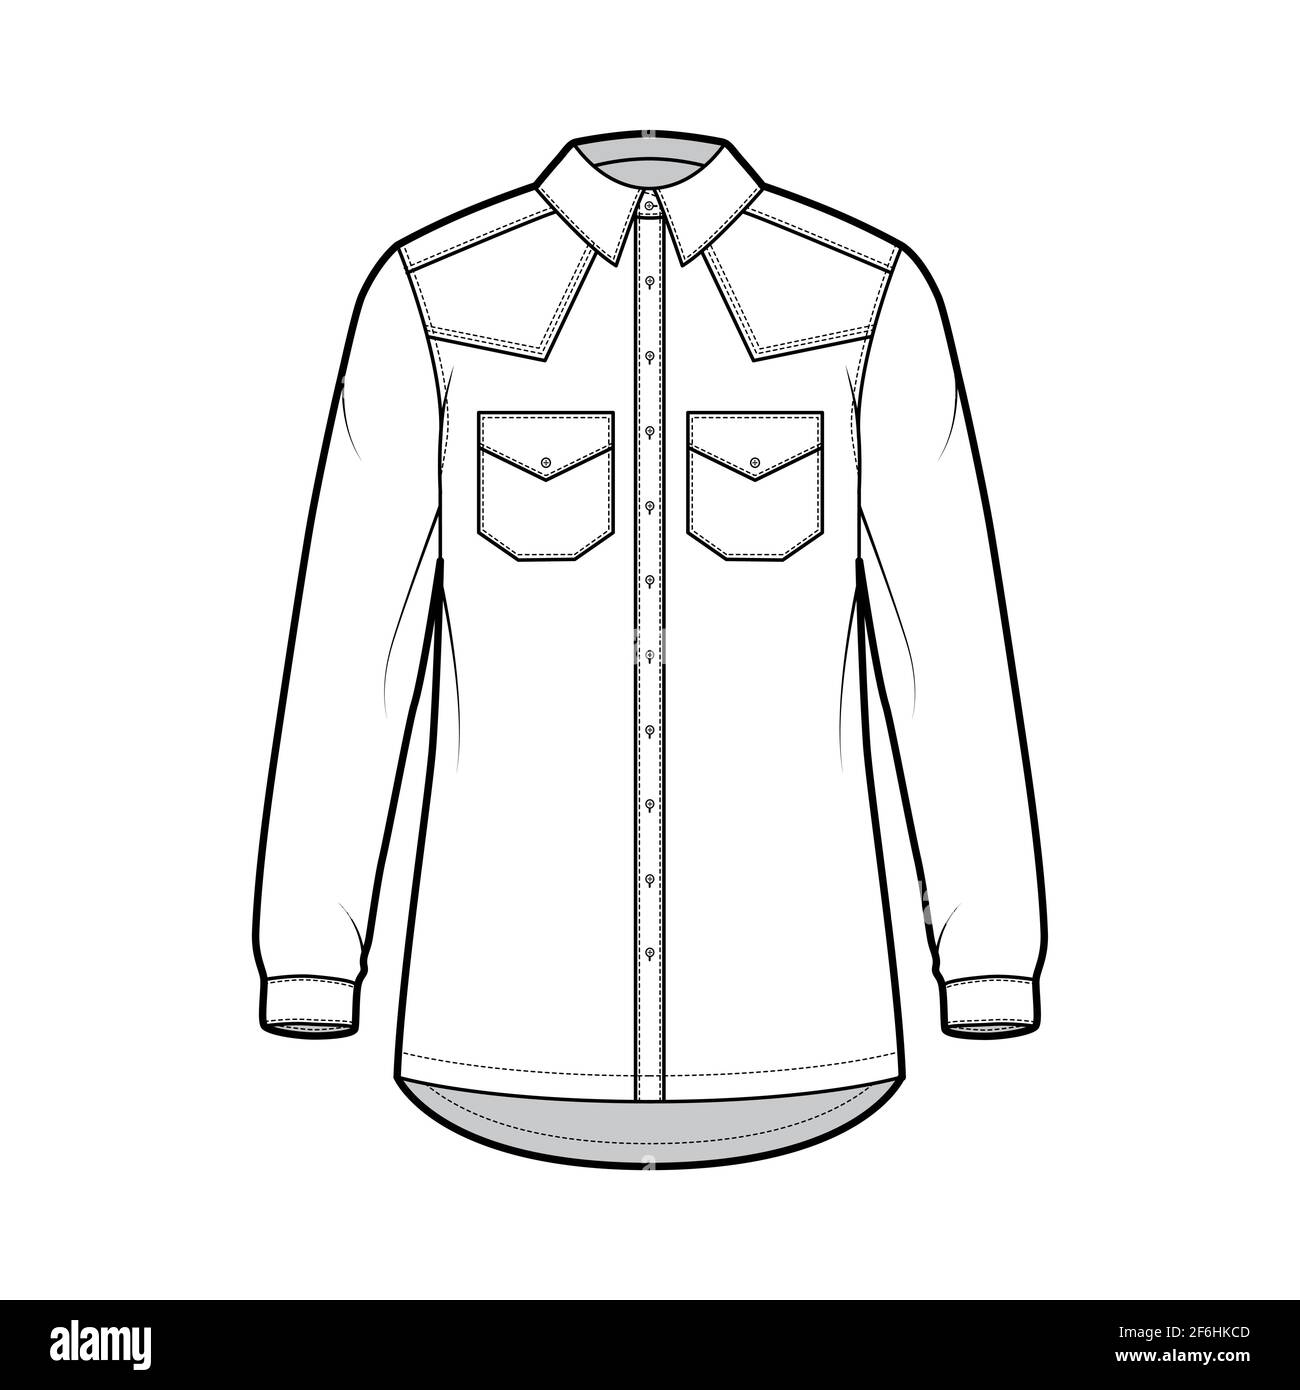 Denim shirt jacket technical fashion illustration with oversized body, flap pockets, button closure, classic collar, long sleeves. Flat apparel front, white color style. Women, men unisex CAD mockup Stock Vector